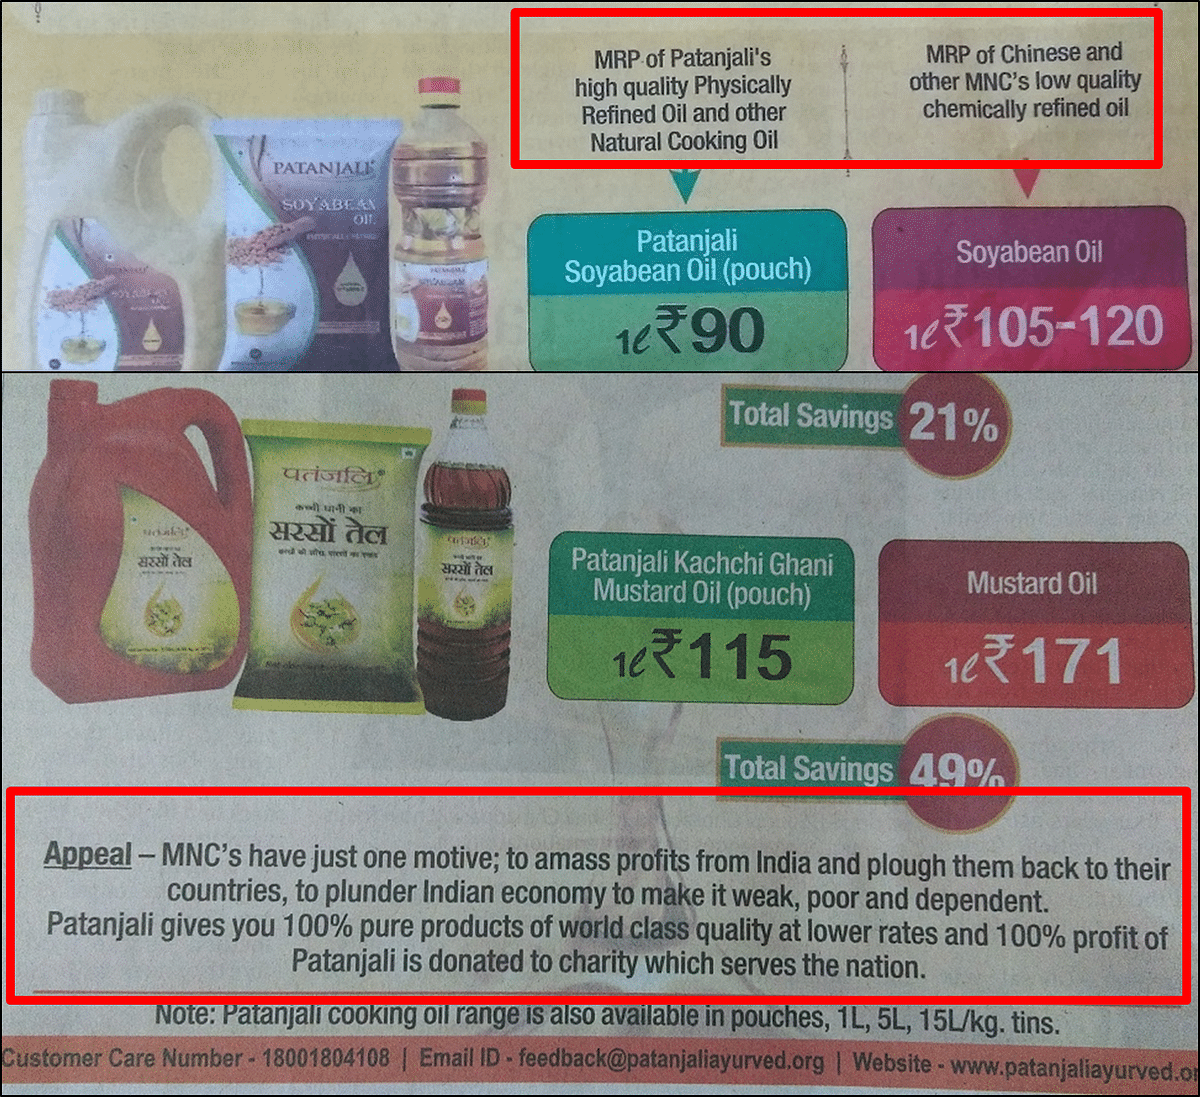 This latest ad says that purchasing Patanjali’s oil is a ‘patriotic duty’.